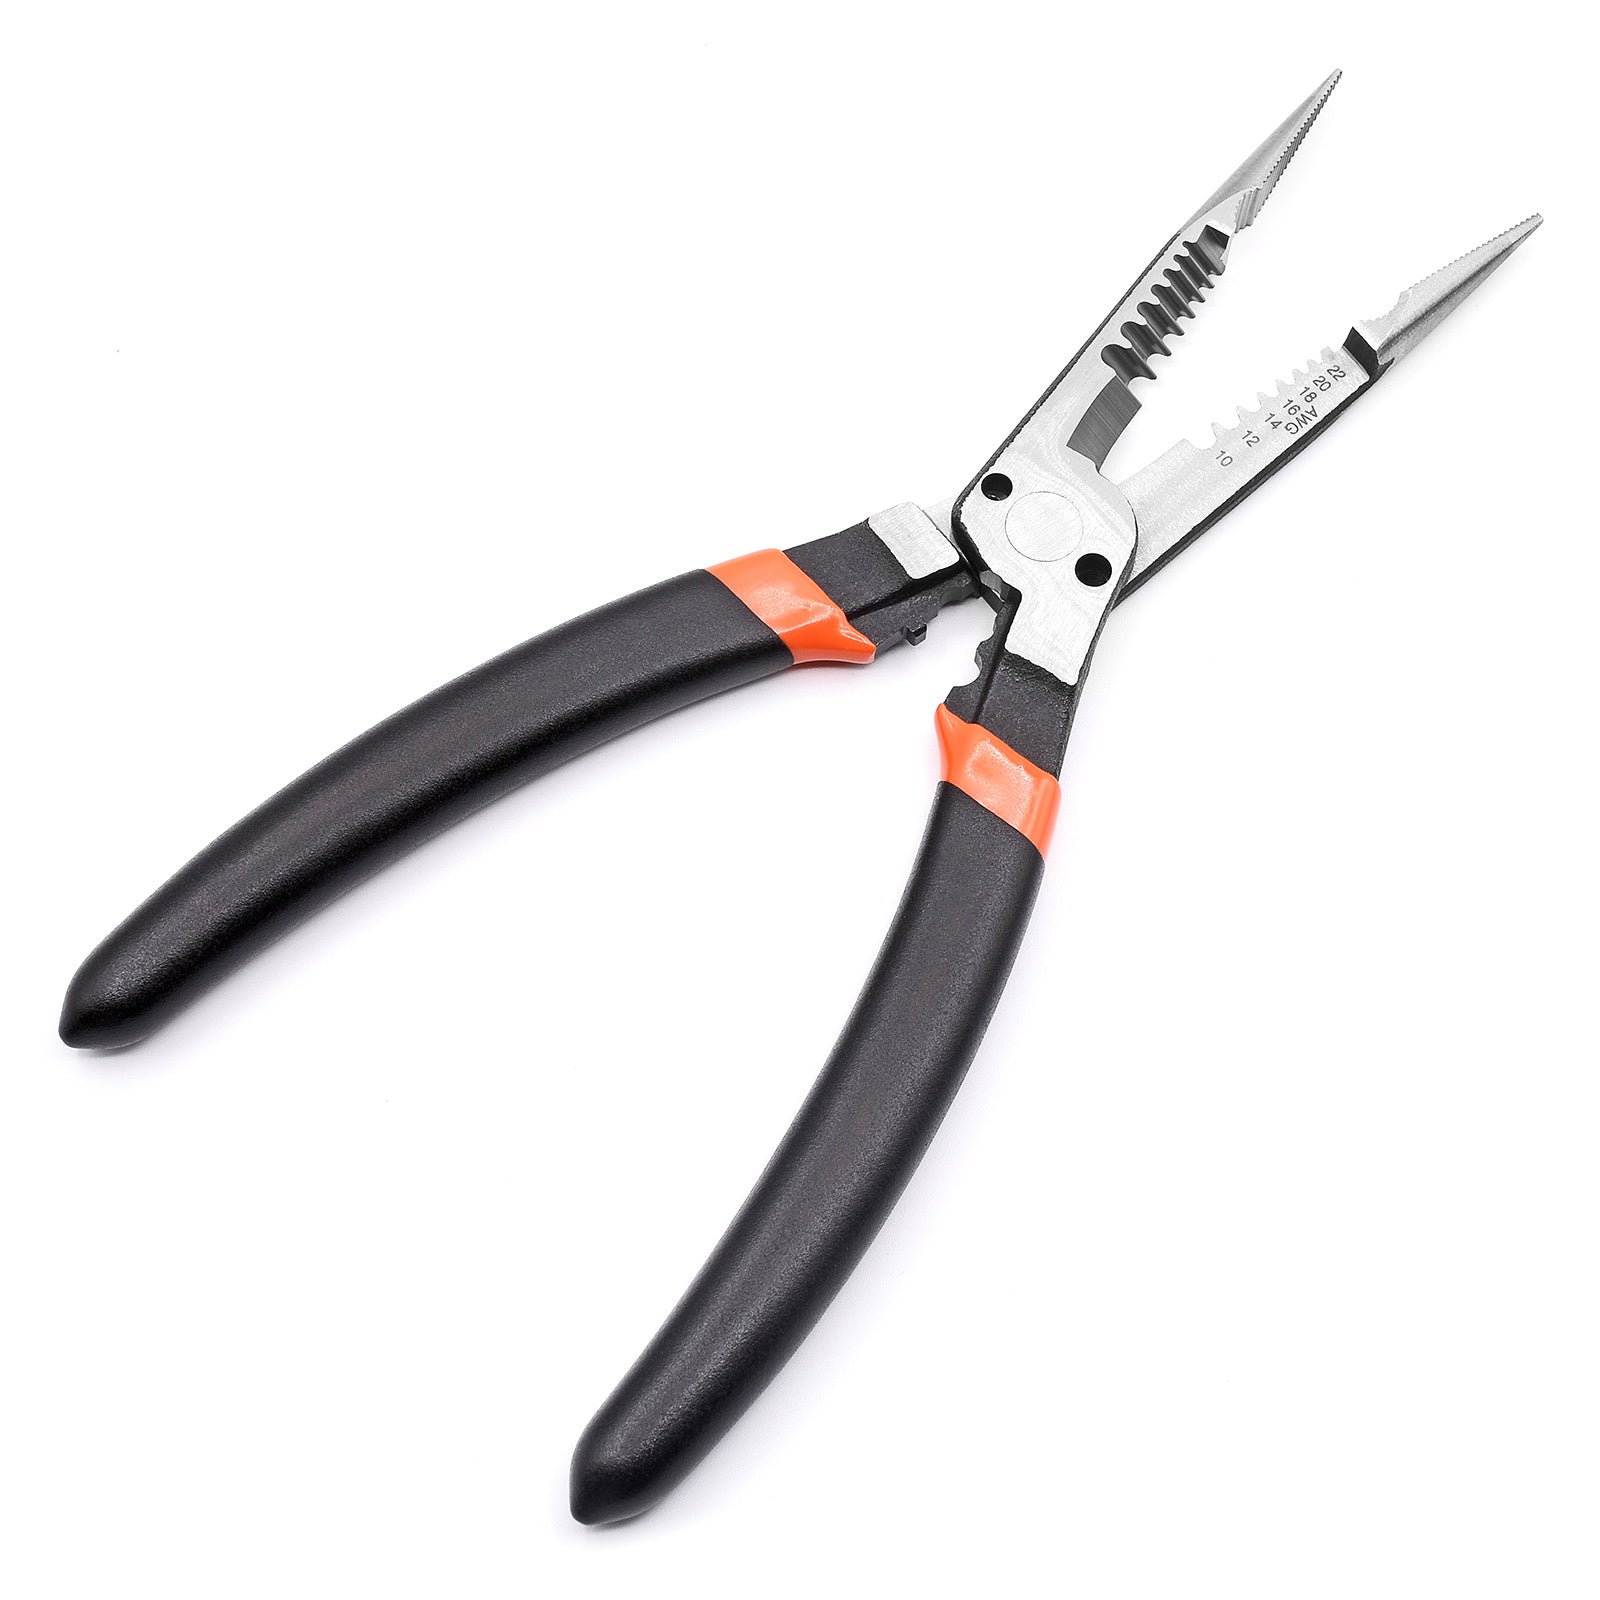 Fujiya Electrician's Plier with Straight Handles - Micro - Mark Nippers